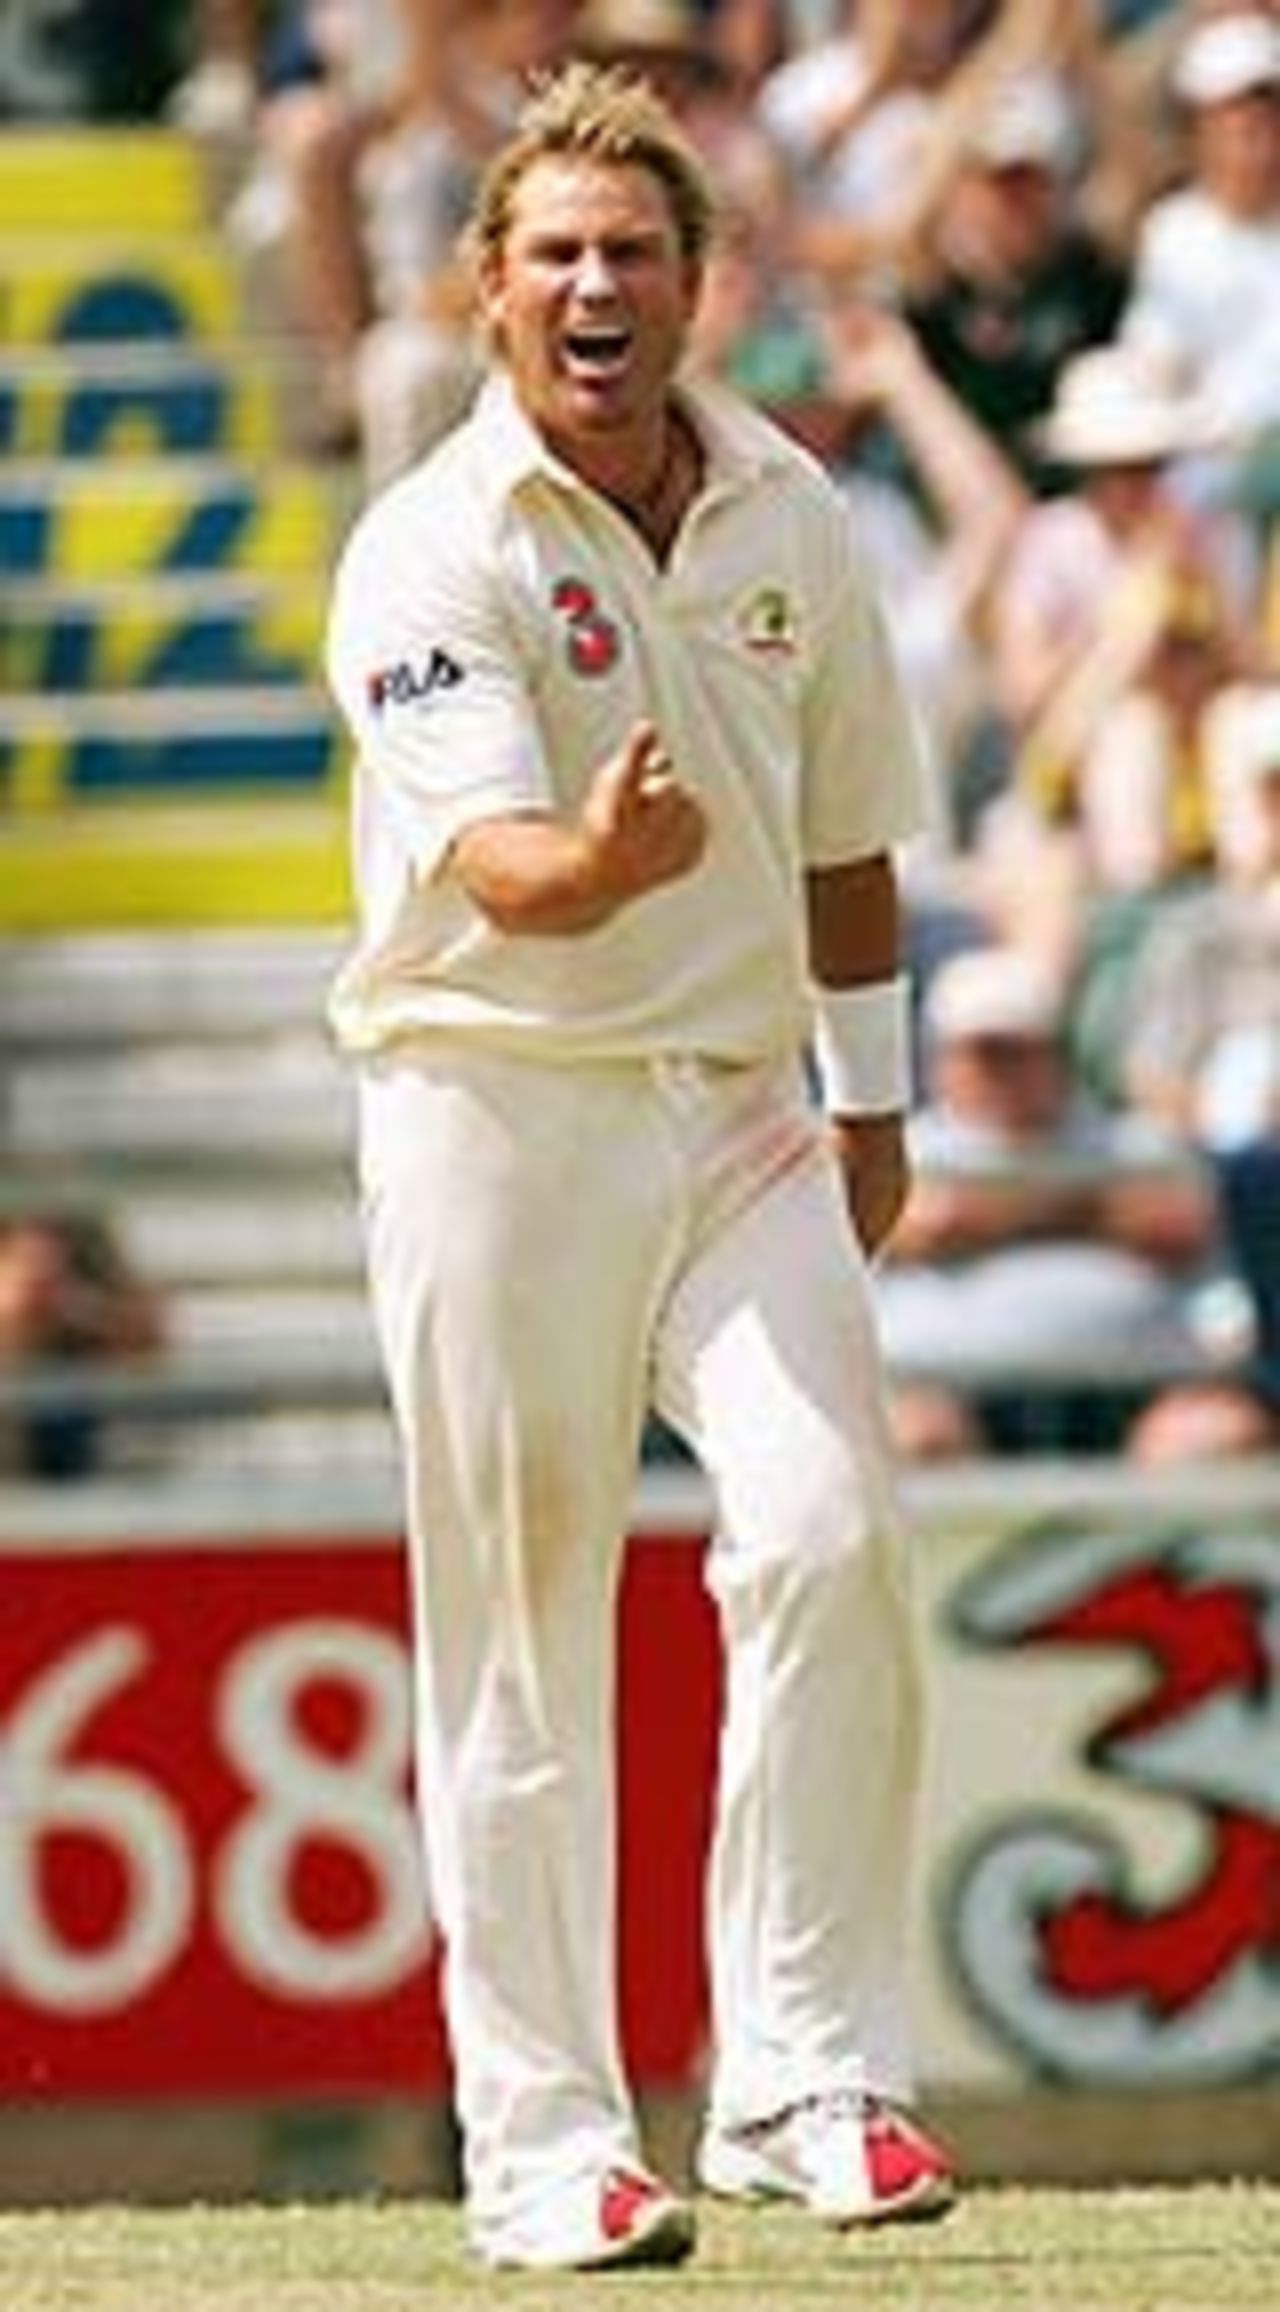 Shane Warne is delighted after snapping up Abdul Razzaq, Australia v Pakistan, 1st Test, Perth, December 17, 2004